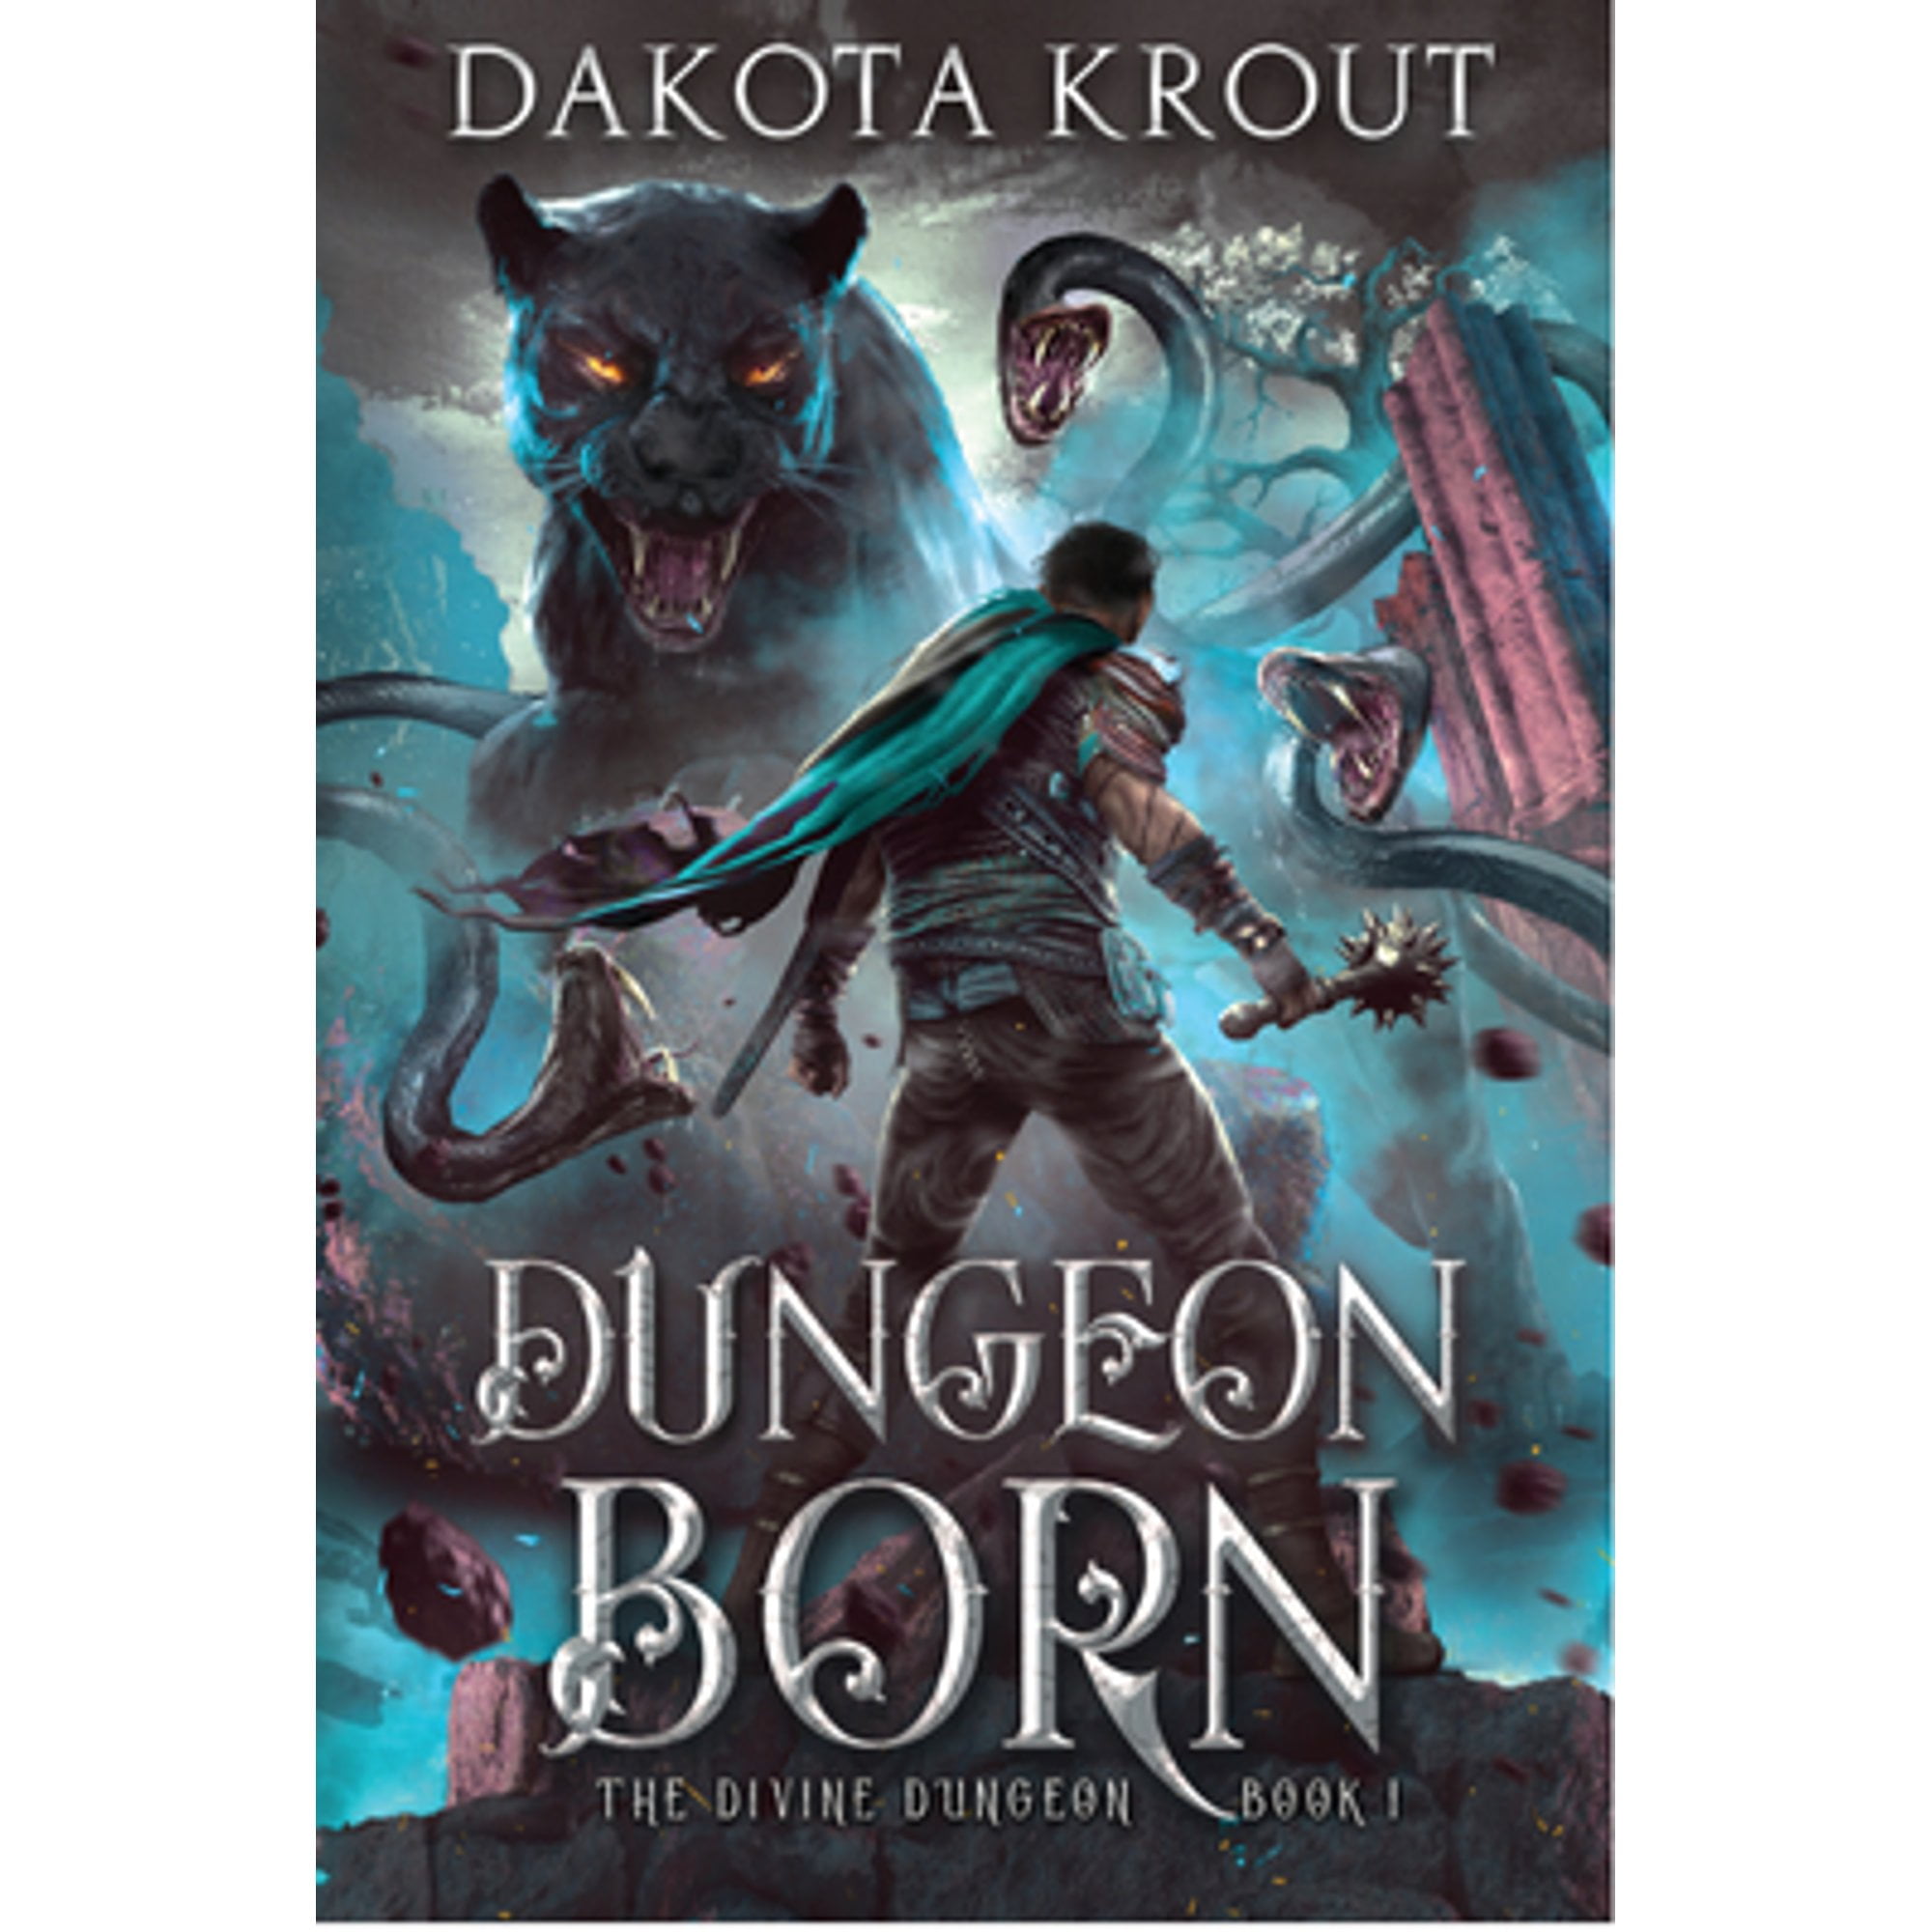 Pre-Owned Dungeon Born (Paperback) by Dakota Krout